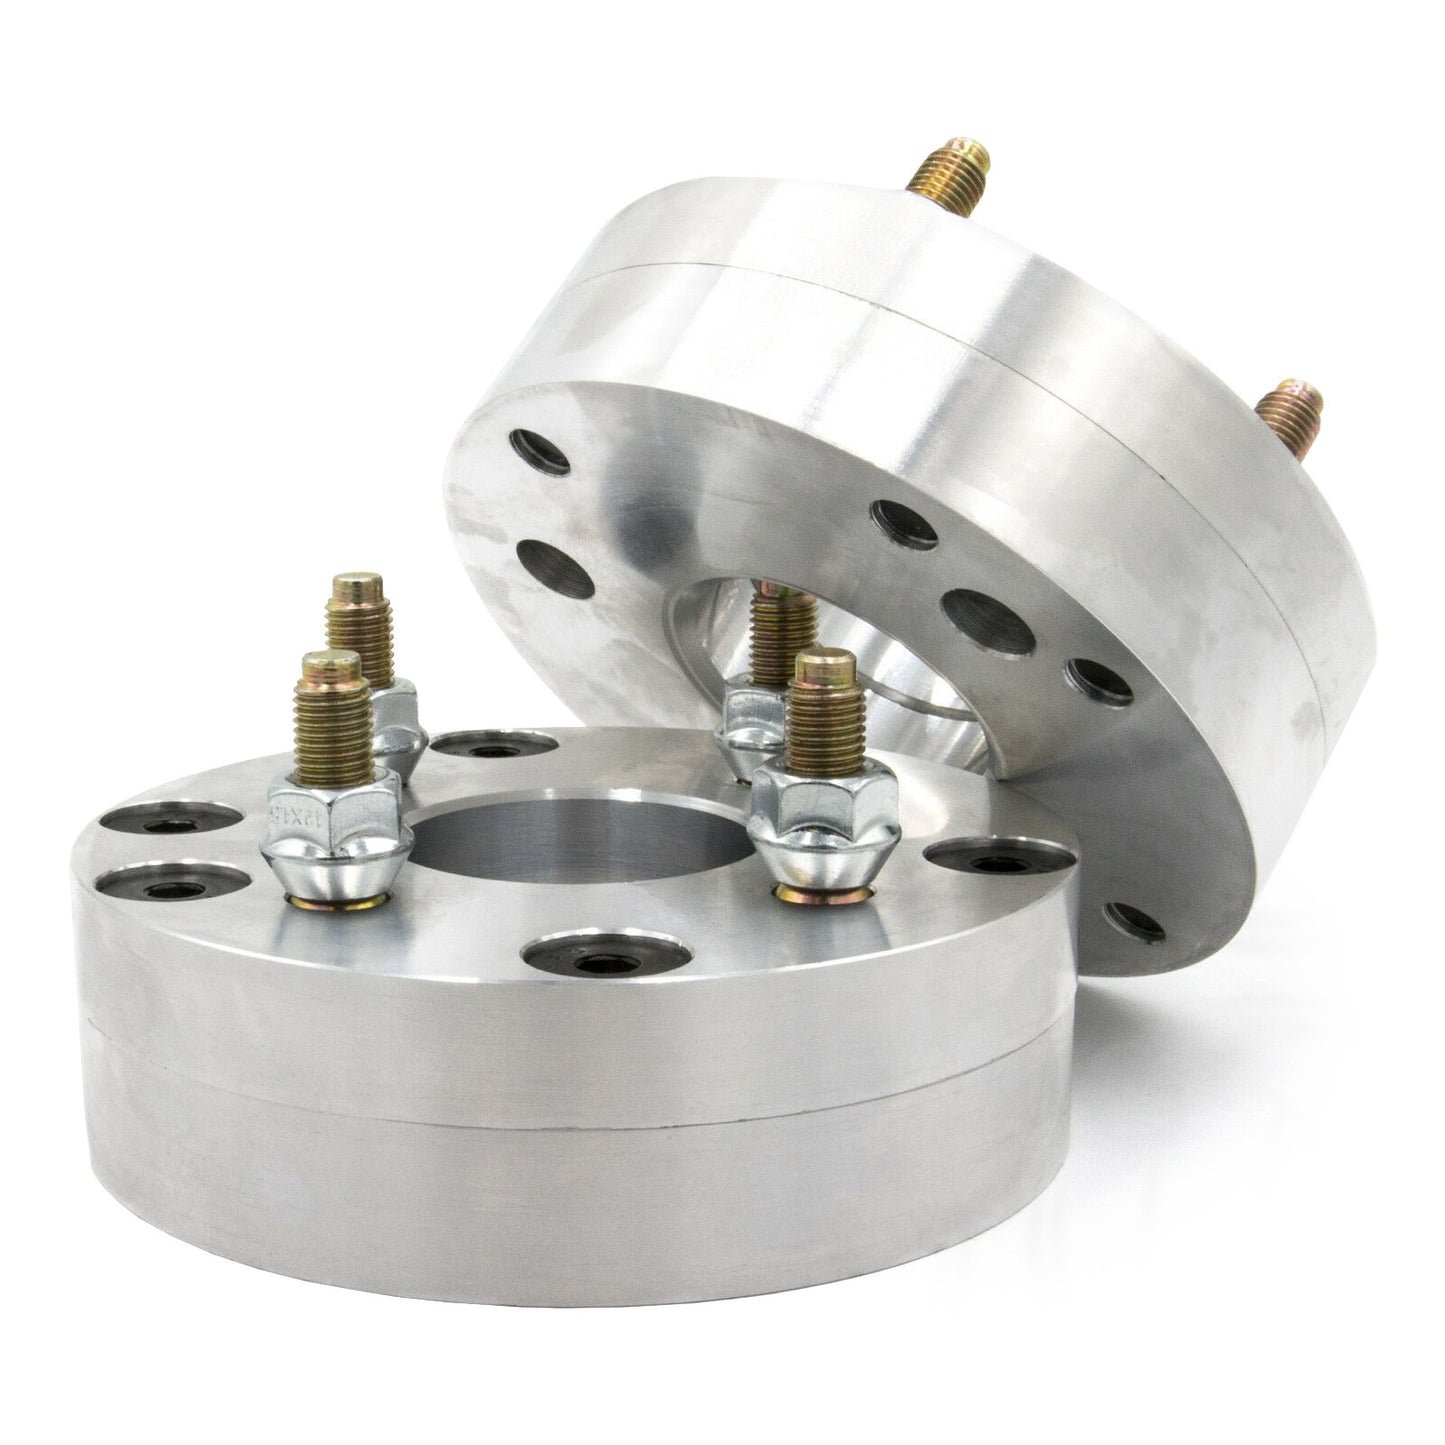 5x112 to 4x100 2 piece Wheel Adapter - Thickness: 1.5" - 3"